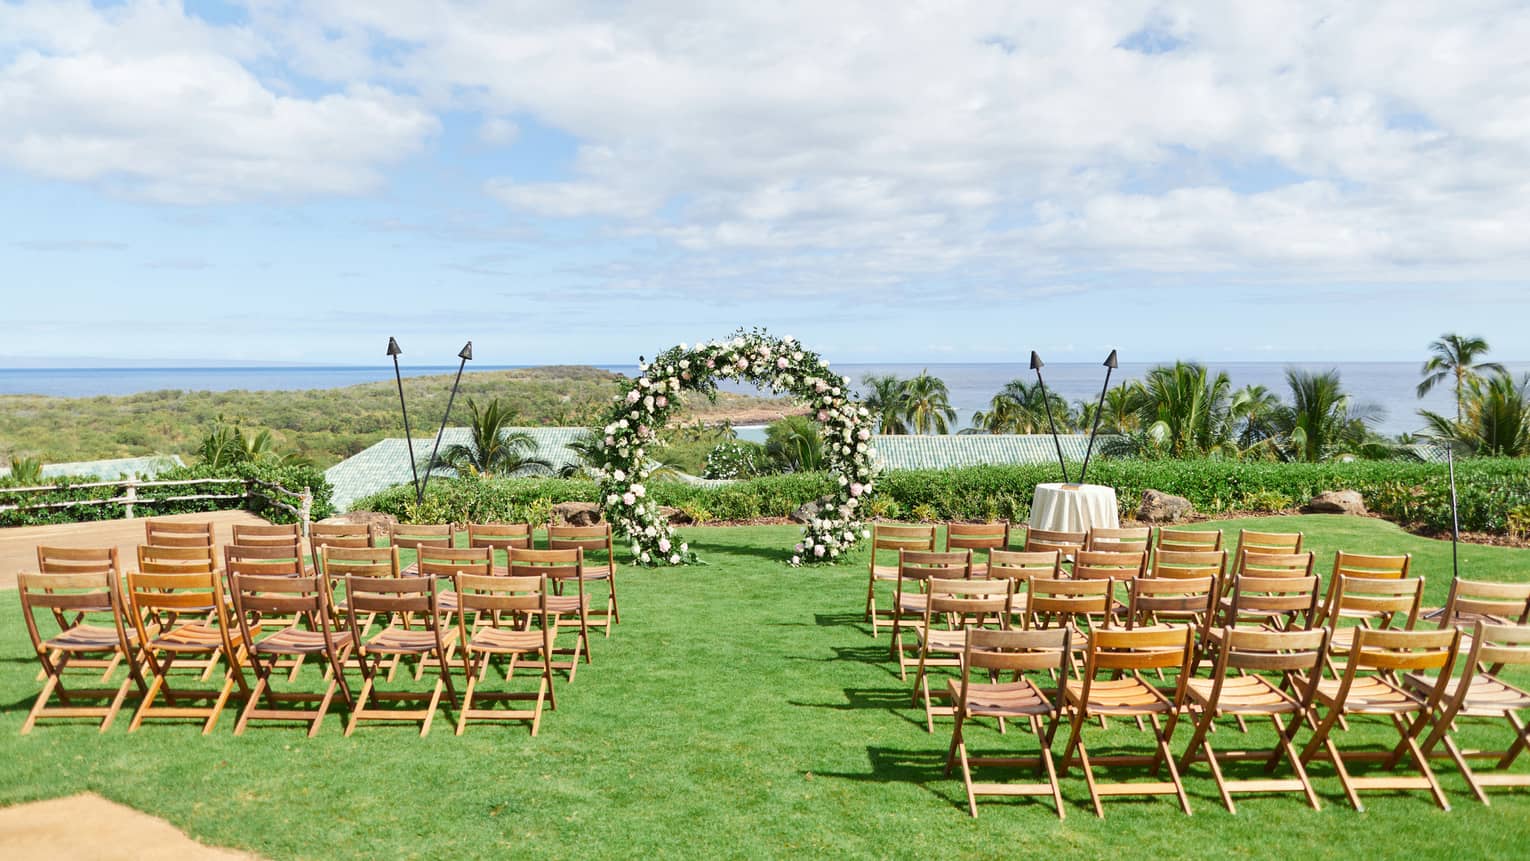 A series of wooden chairs set up in front of a floral arch and tiki torches, all overlooking the Lanai golf course.